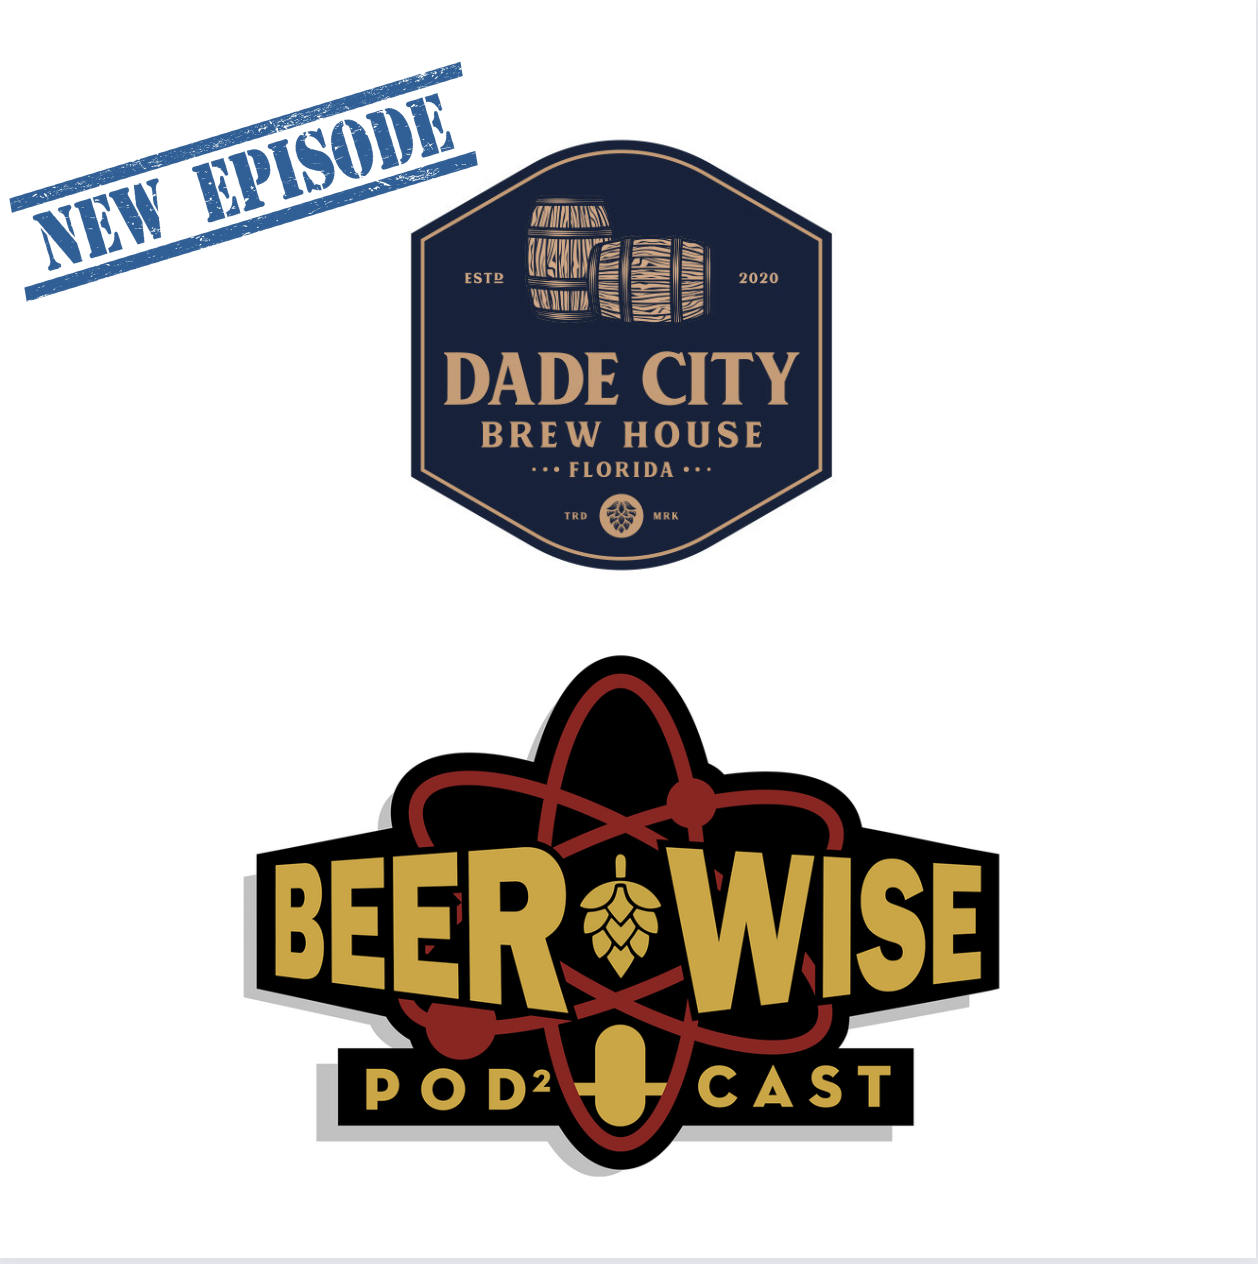 Dade City Brew House BeerWise Podcast